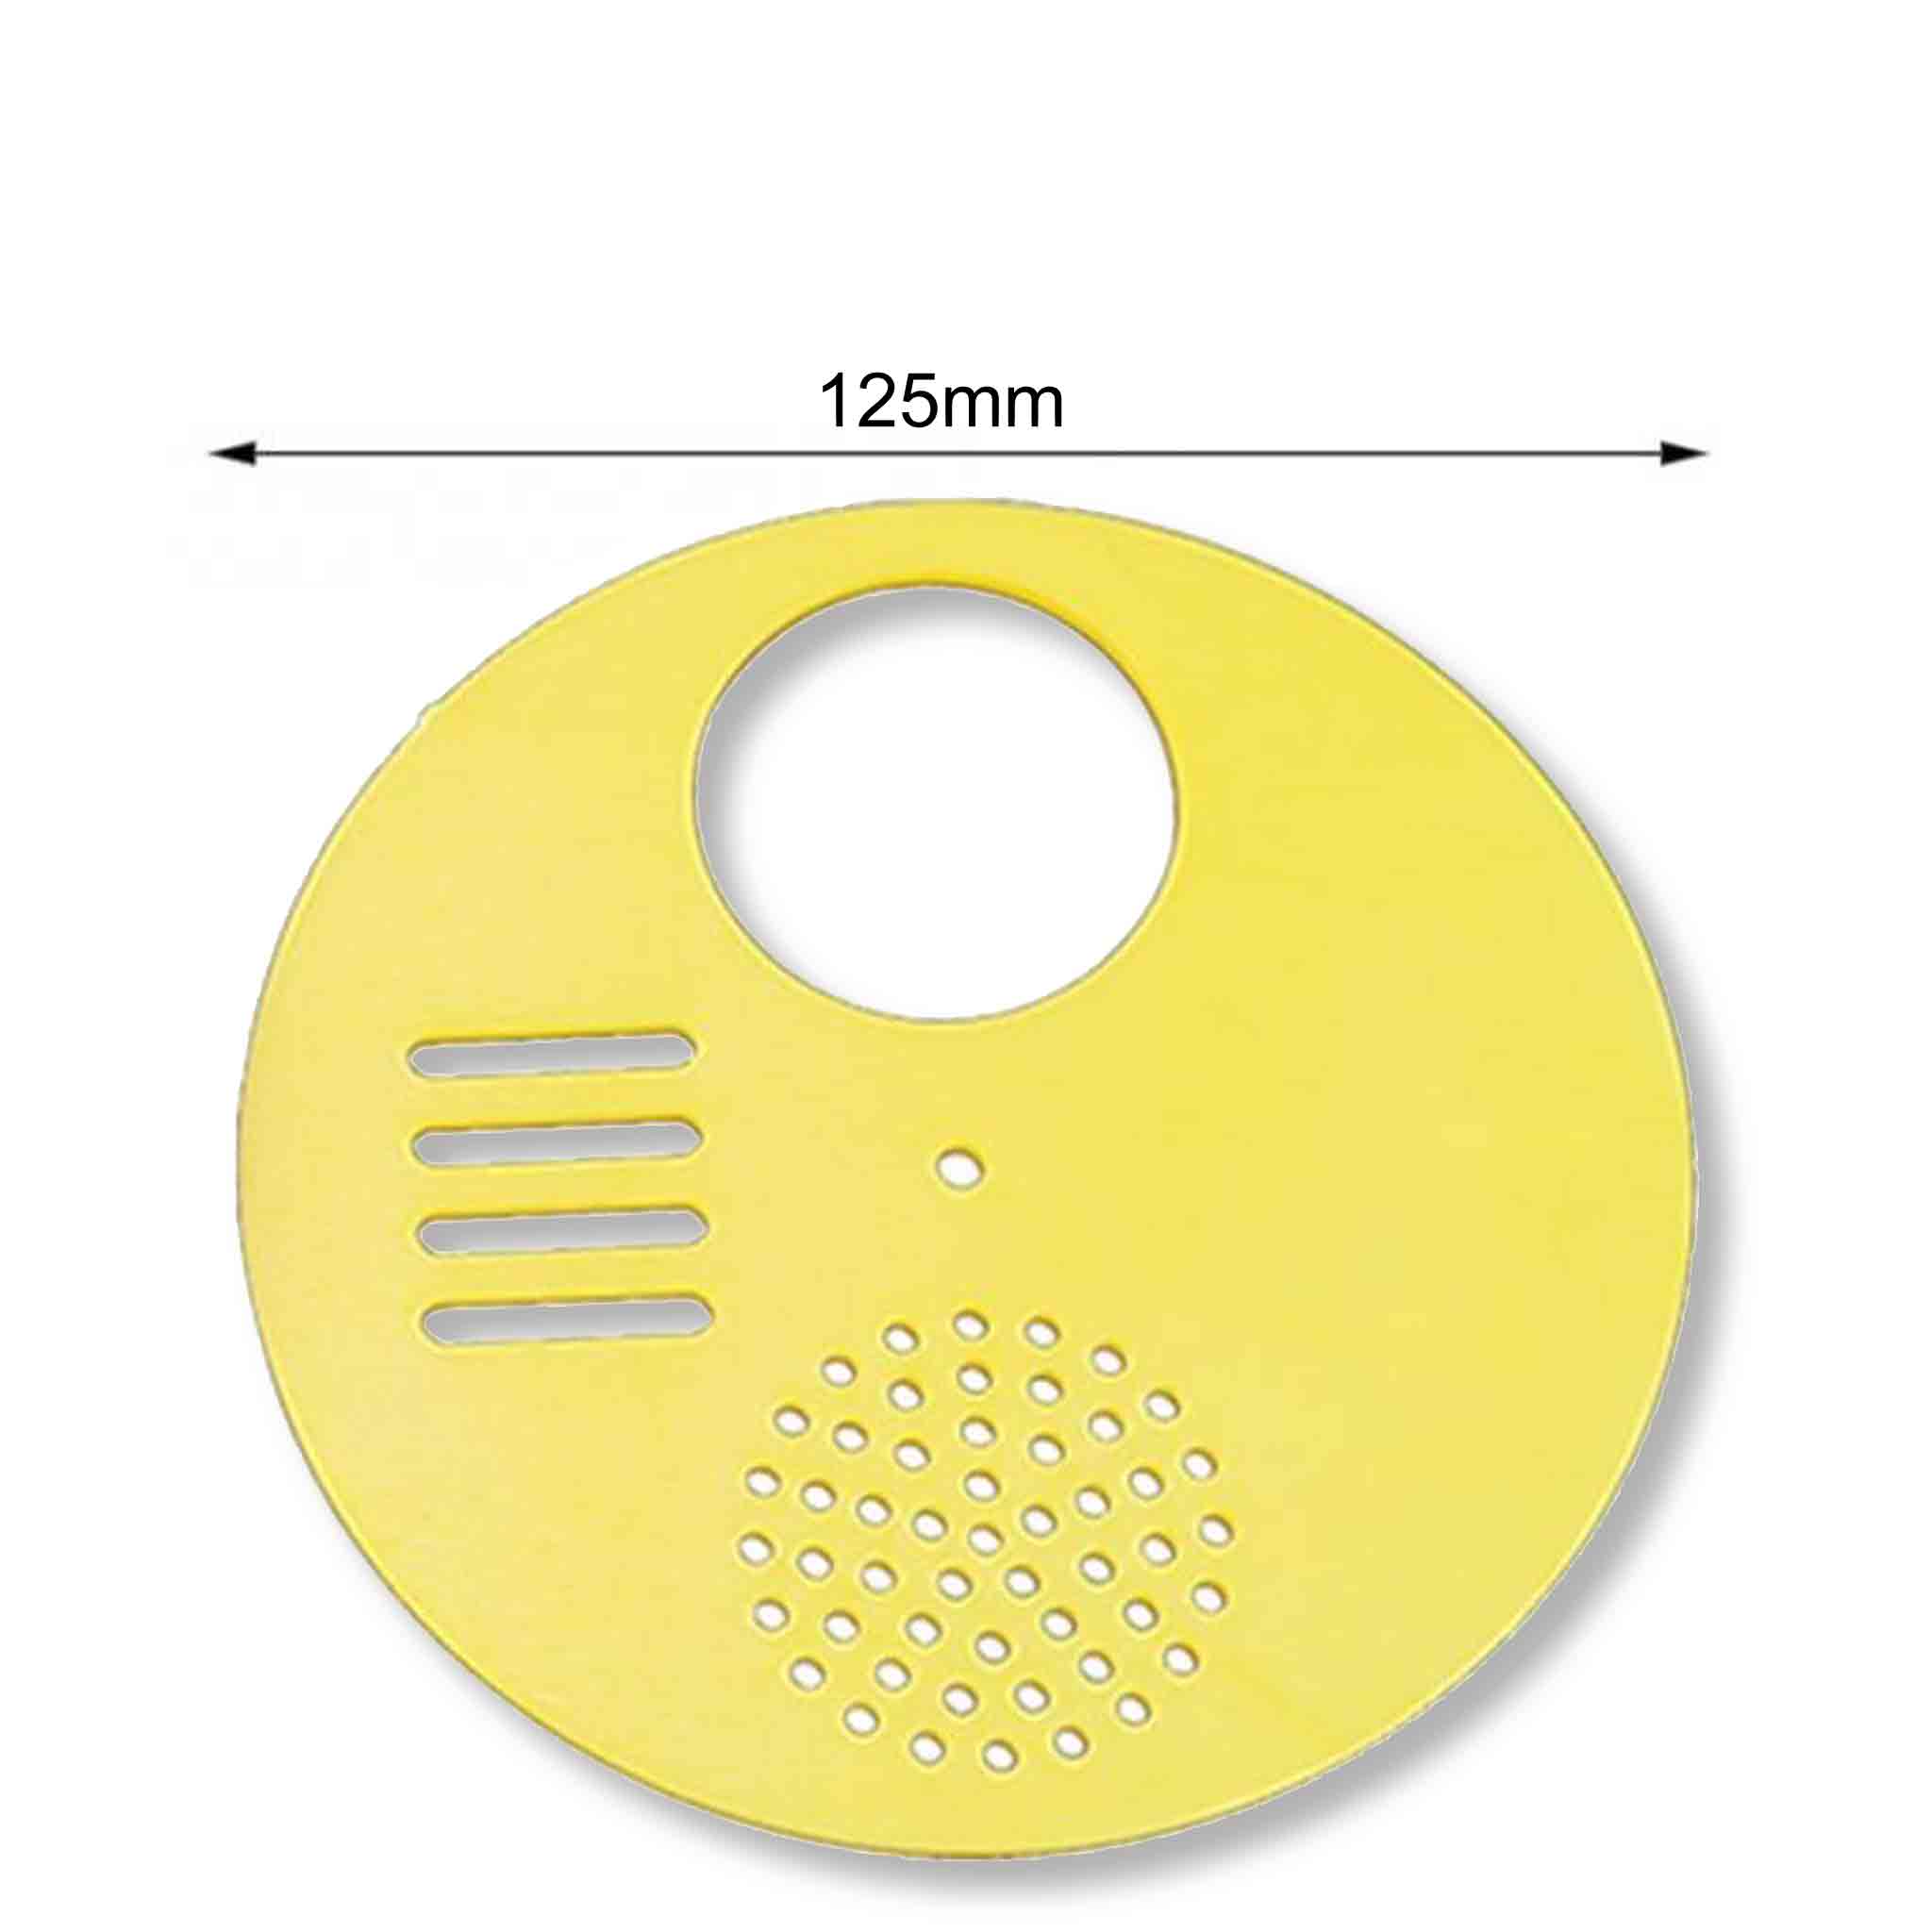 Round Disc Plastic Beehive Door Entrance, Gates and Ventilation (10 Pack) - Hive Parts collection by Buzzbee Beekeeping Supplies